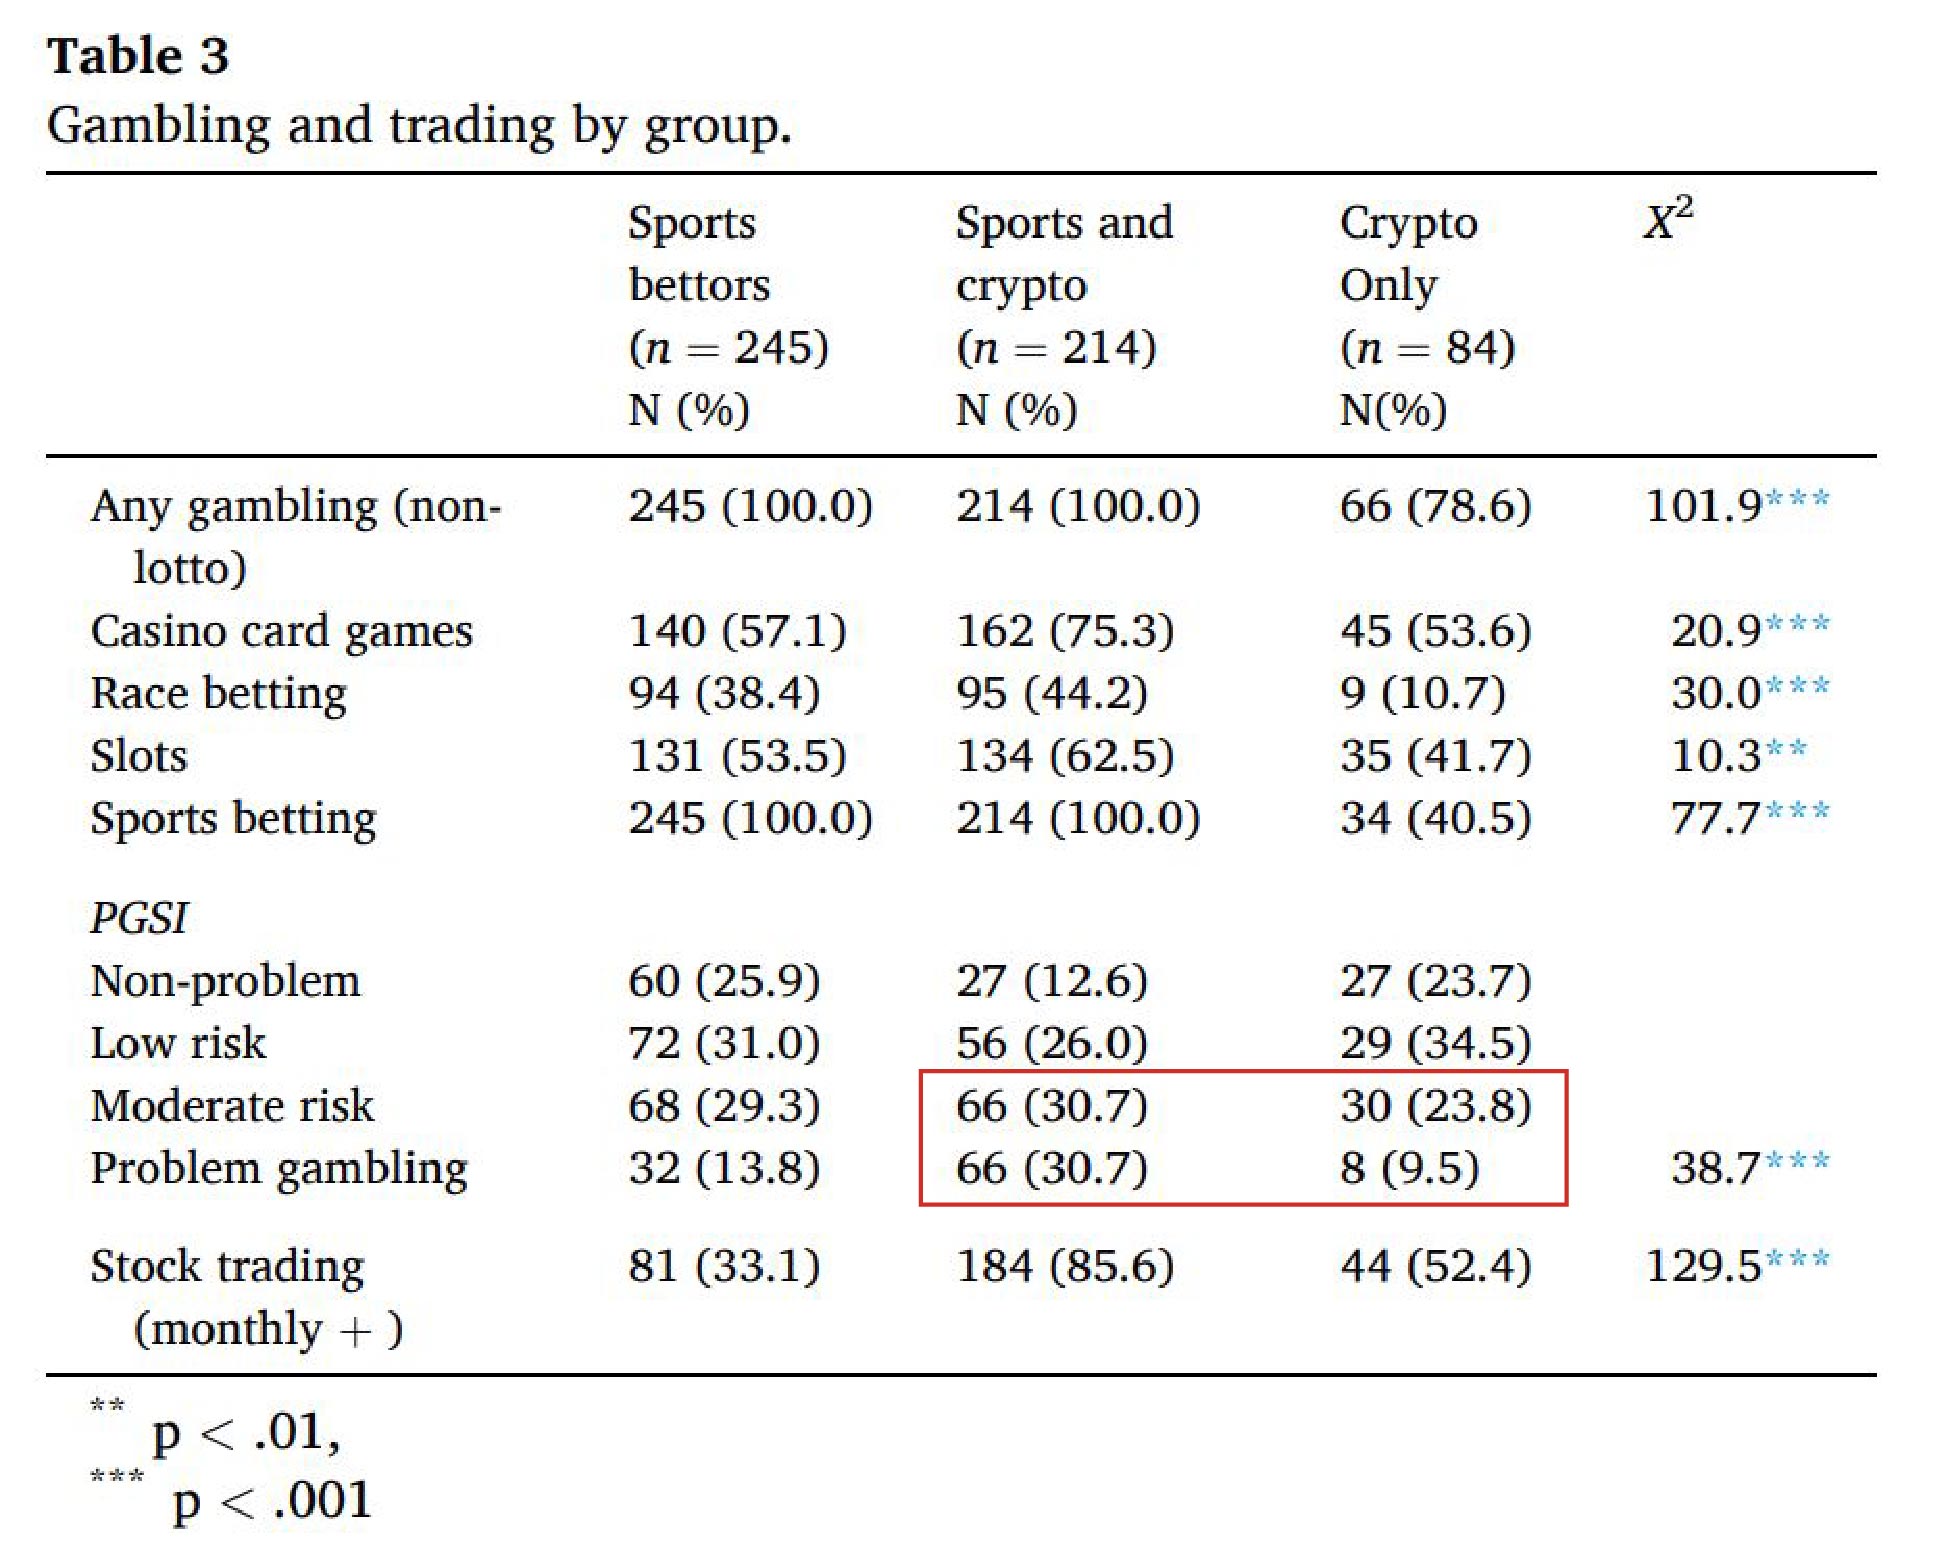 cryptocurrency stock trading gambling addiction